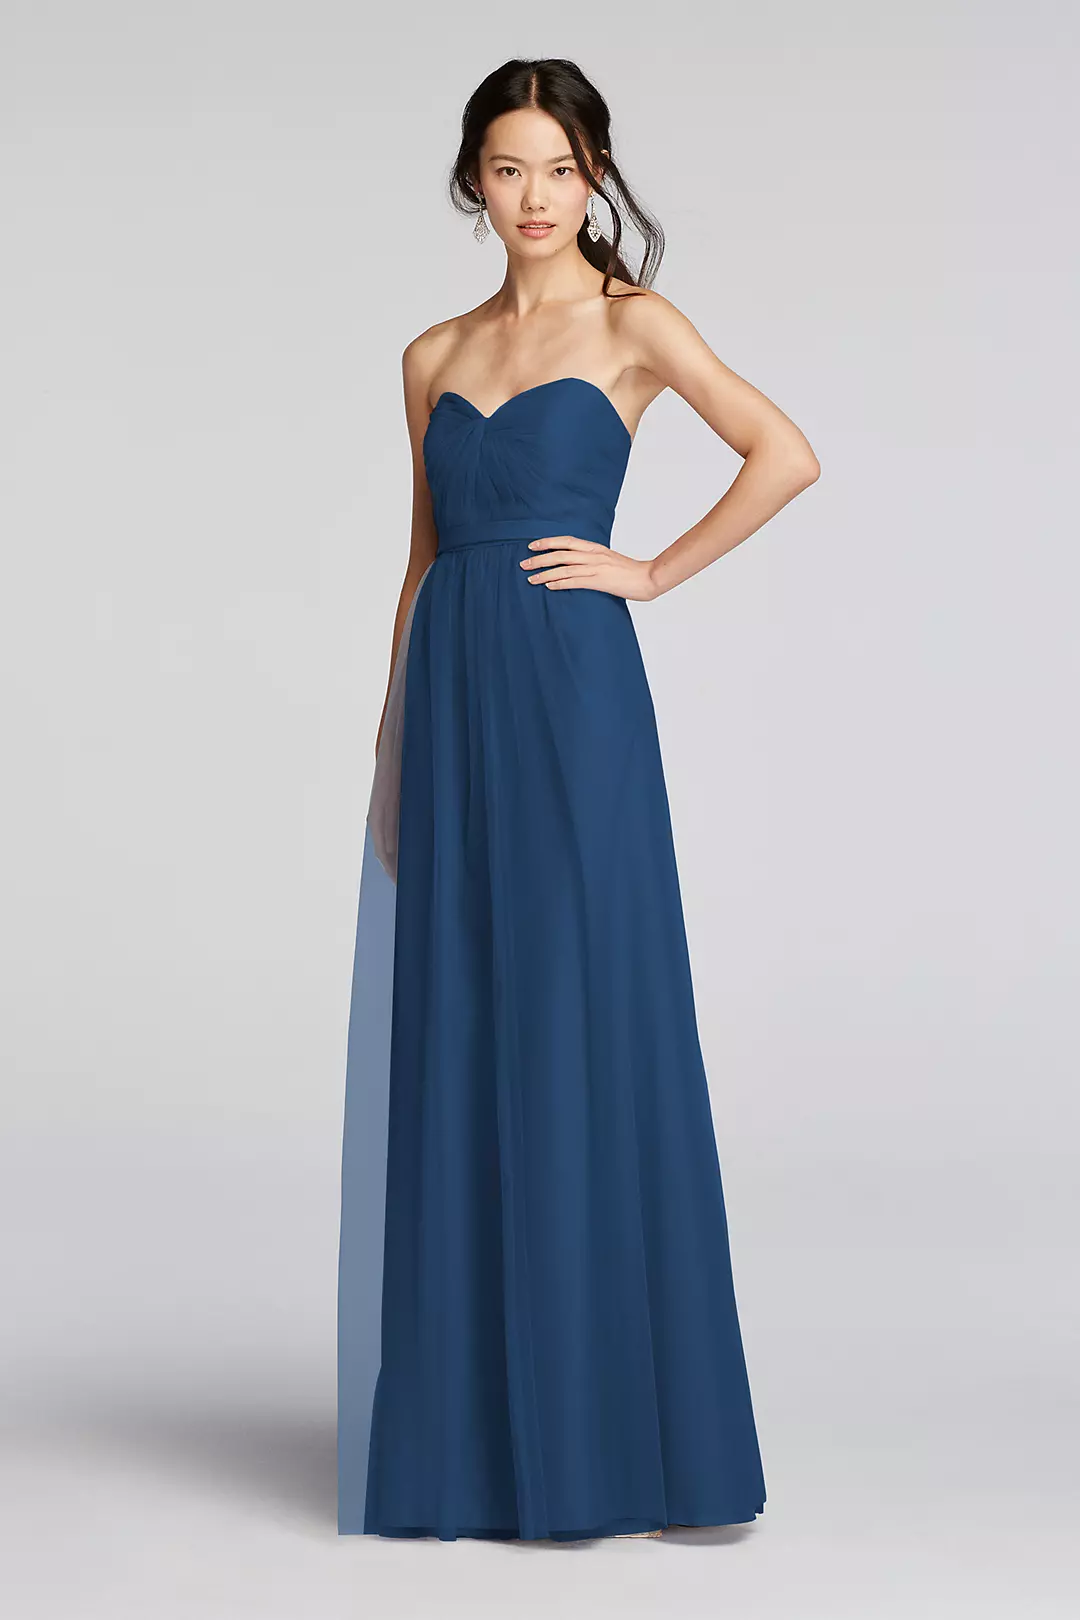 Pleated Bodice Tulle Dress with Removable Belt Image